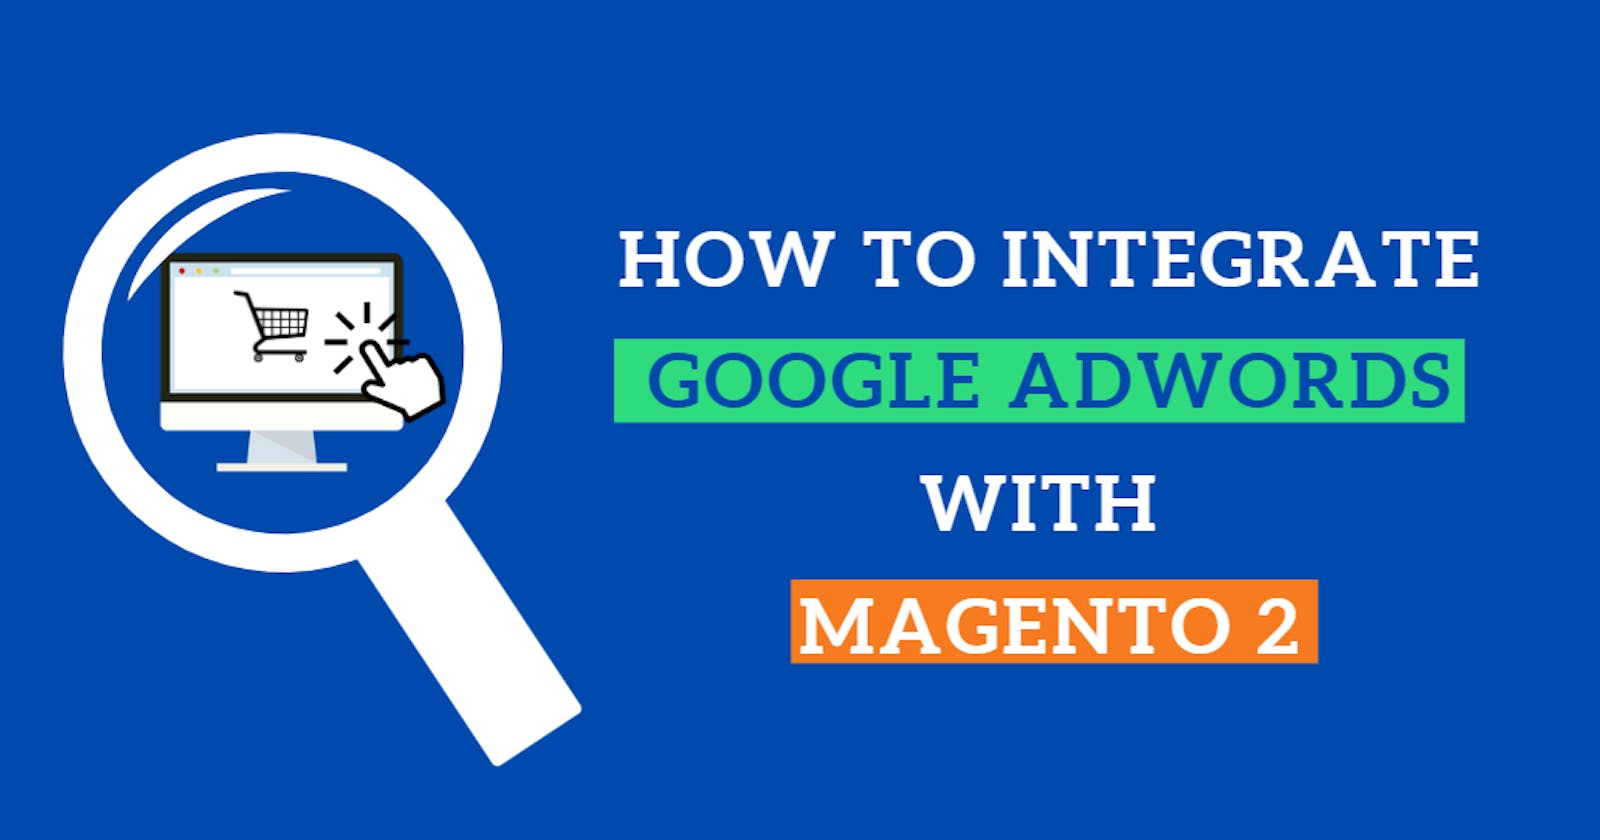 How to integrate Google Adwords with Magento 2